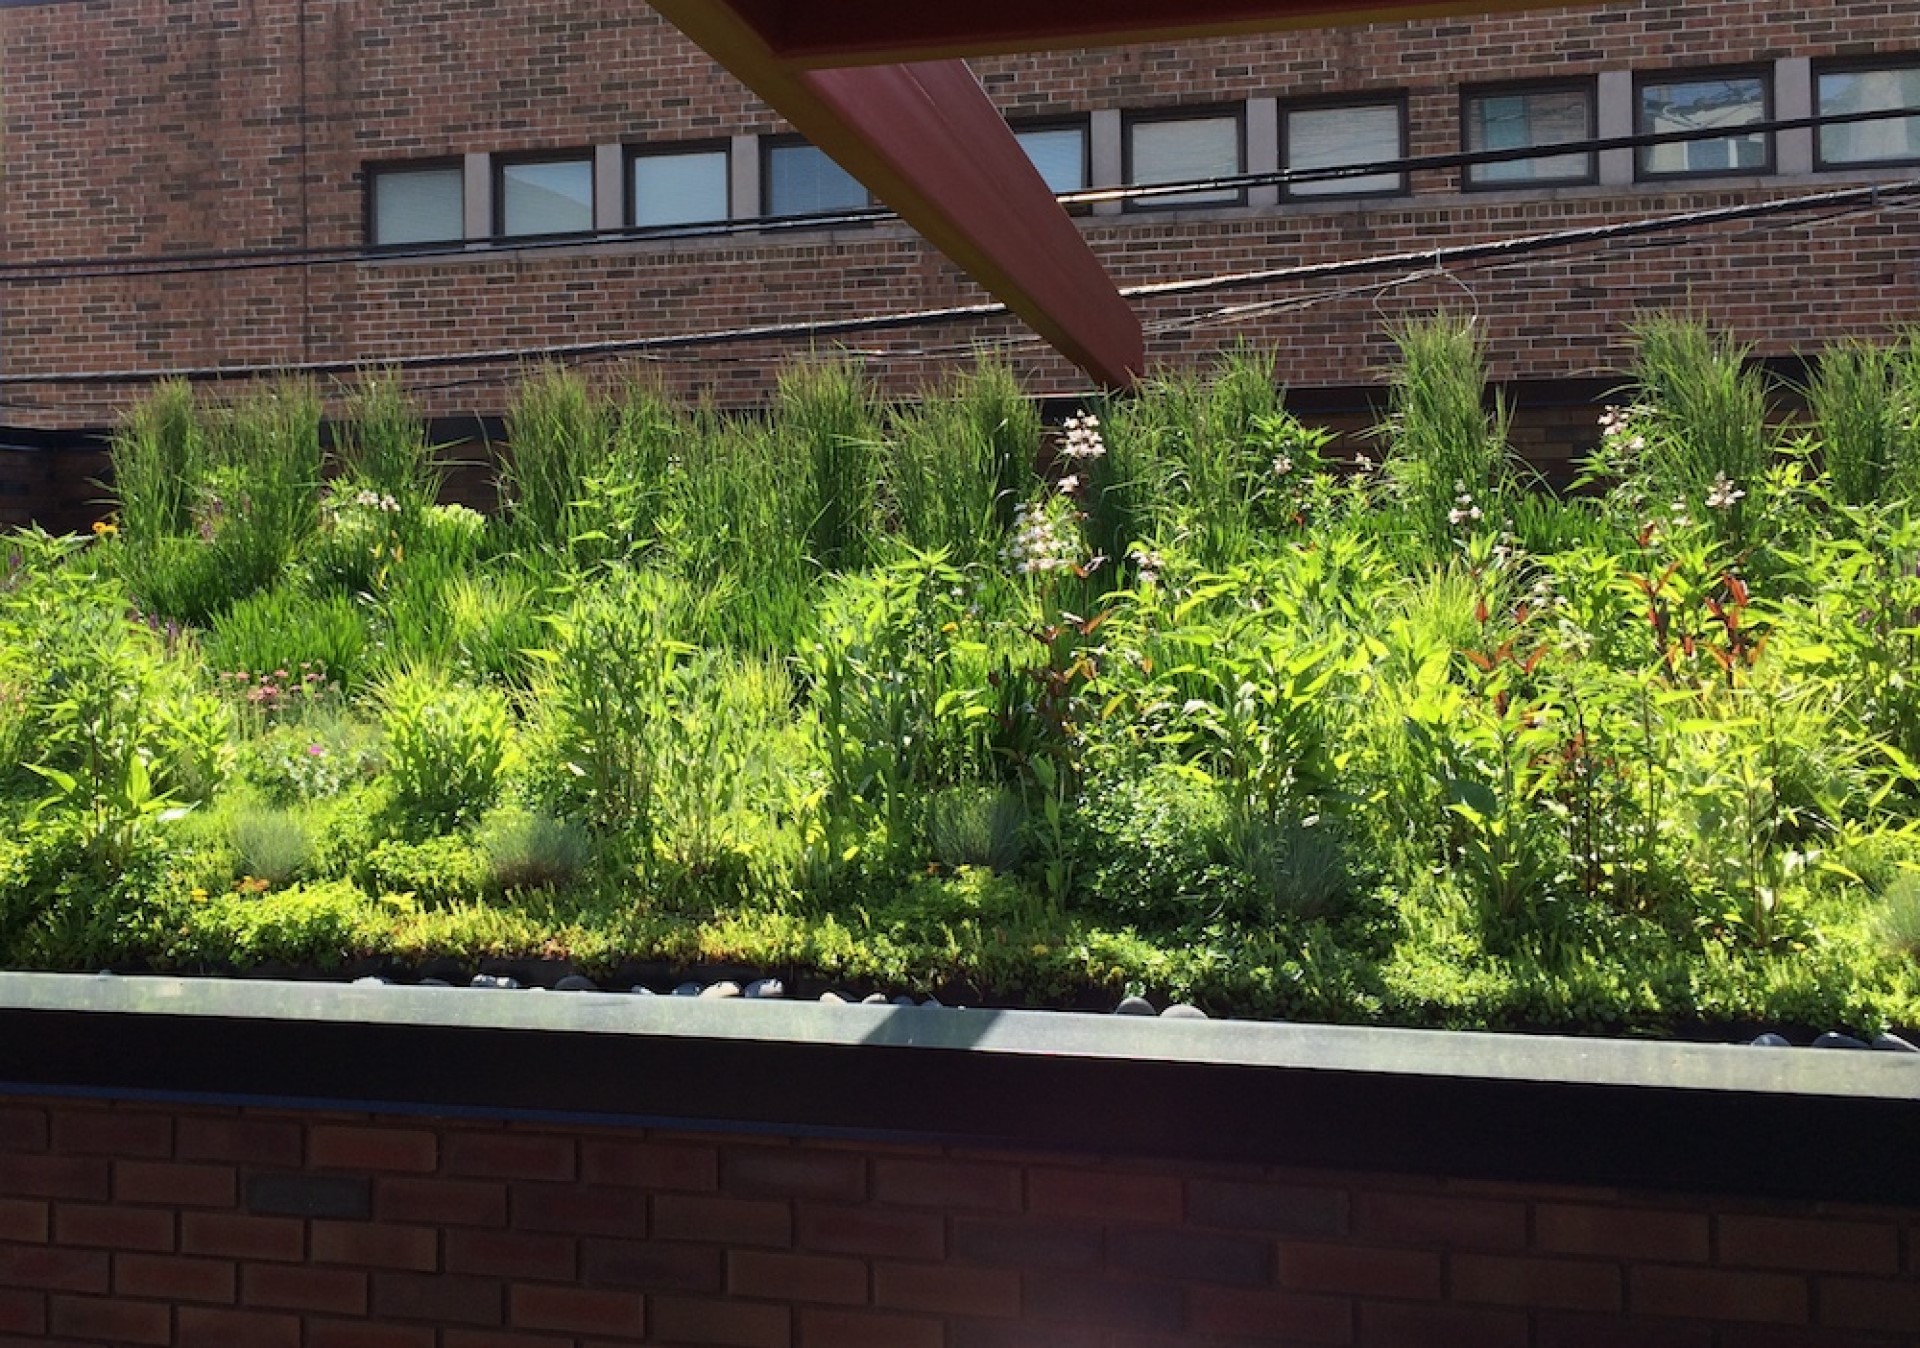 What Are the Layers of a Green Roof? | Green roofs are very efficient systems that rely on careful combinations of engineered components to work effectively.